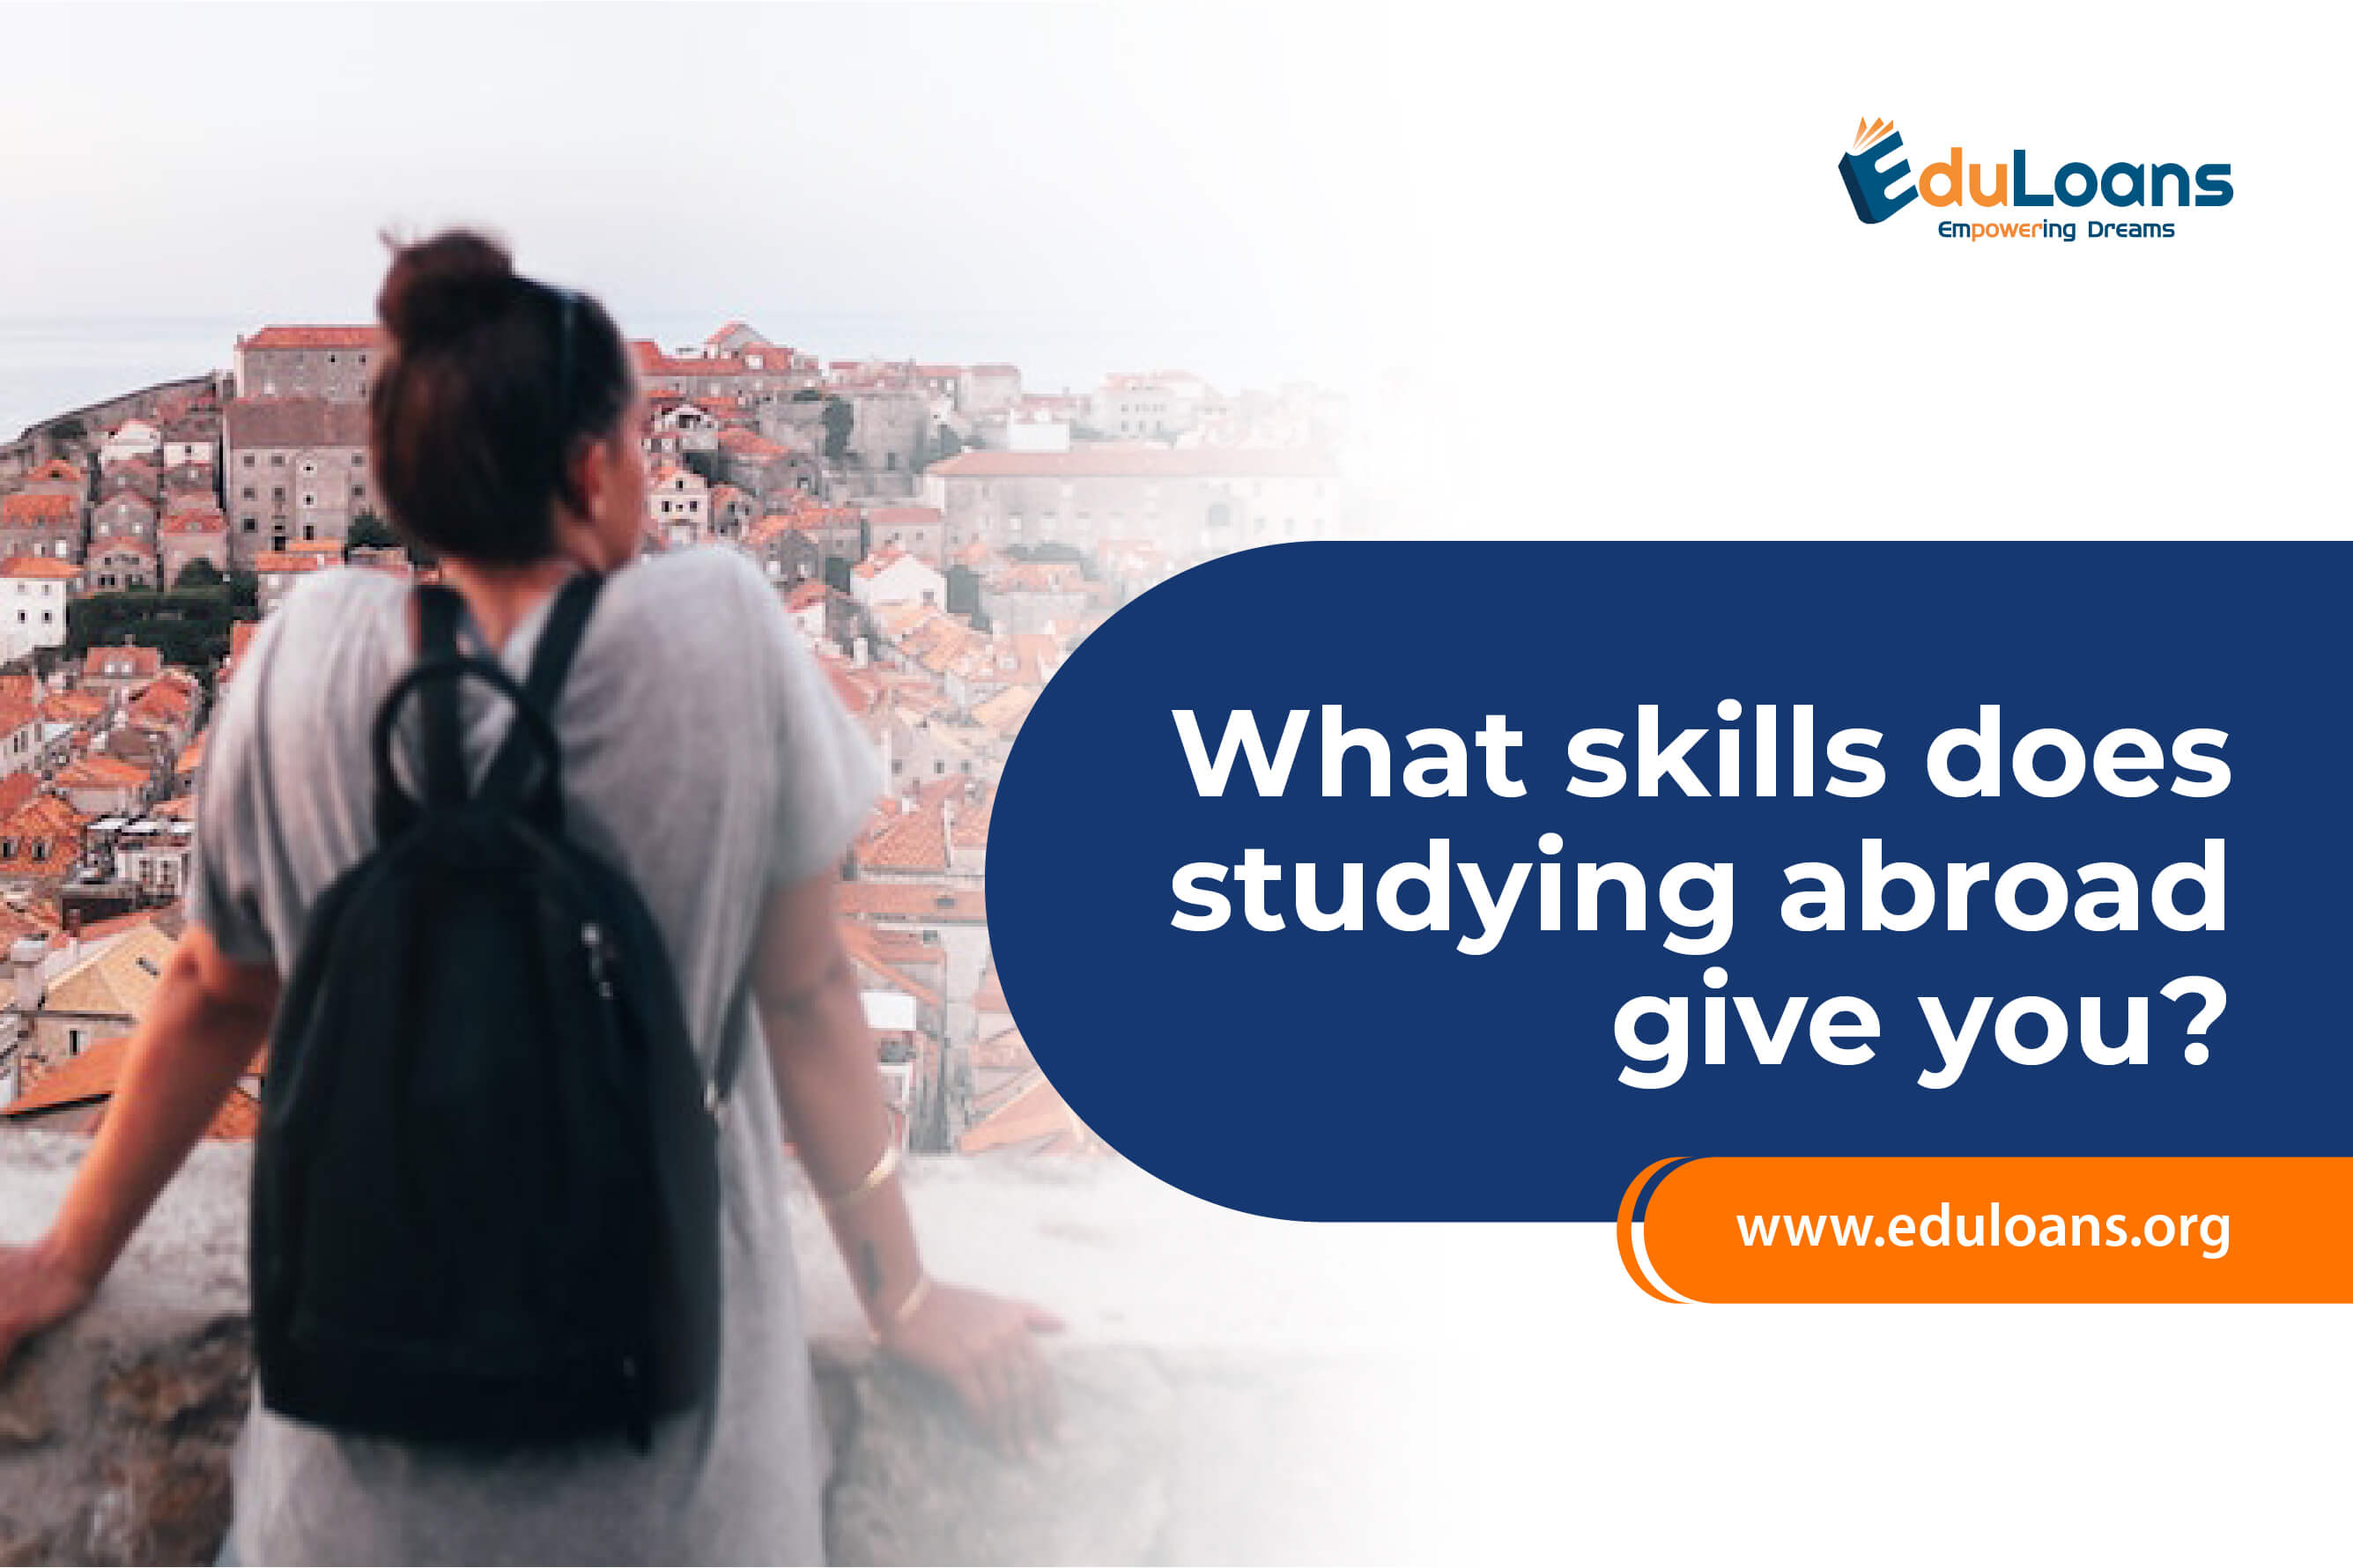 What skills does studying abroad give you?